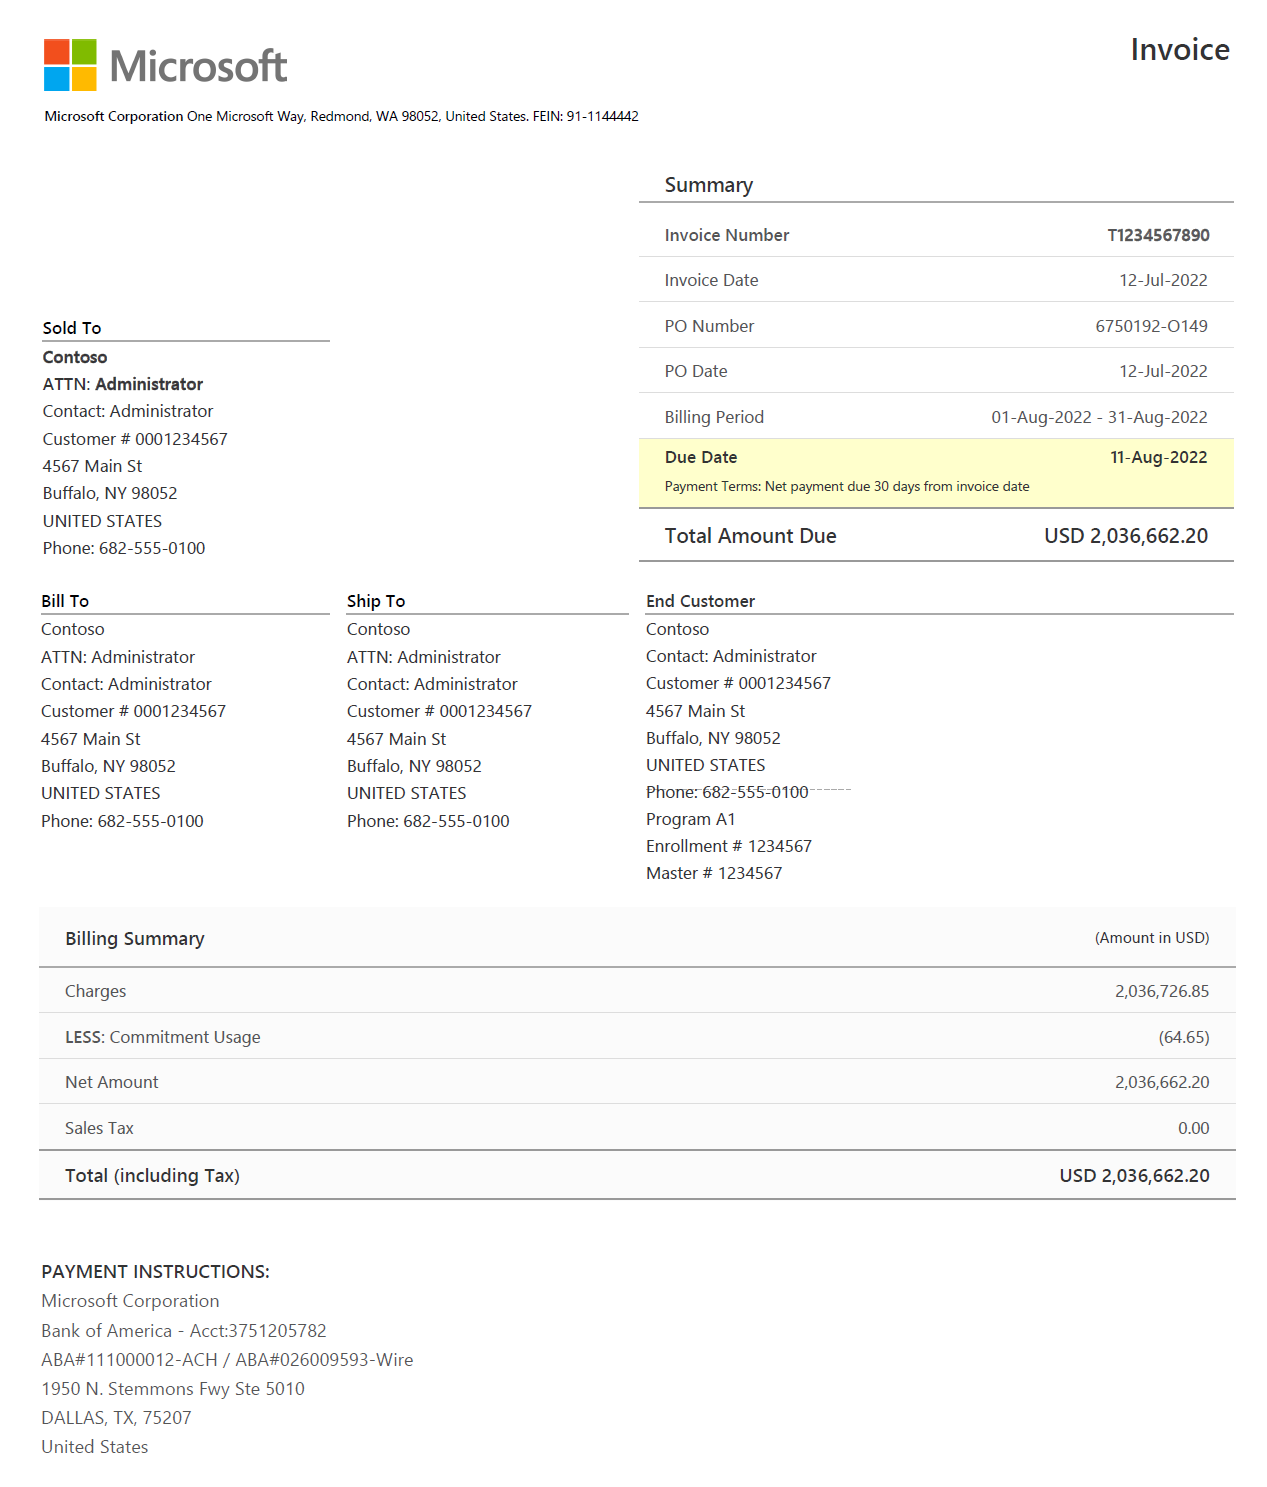 Example screenshot of the first page of the invoice file.